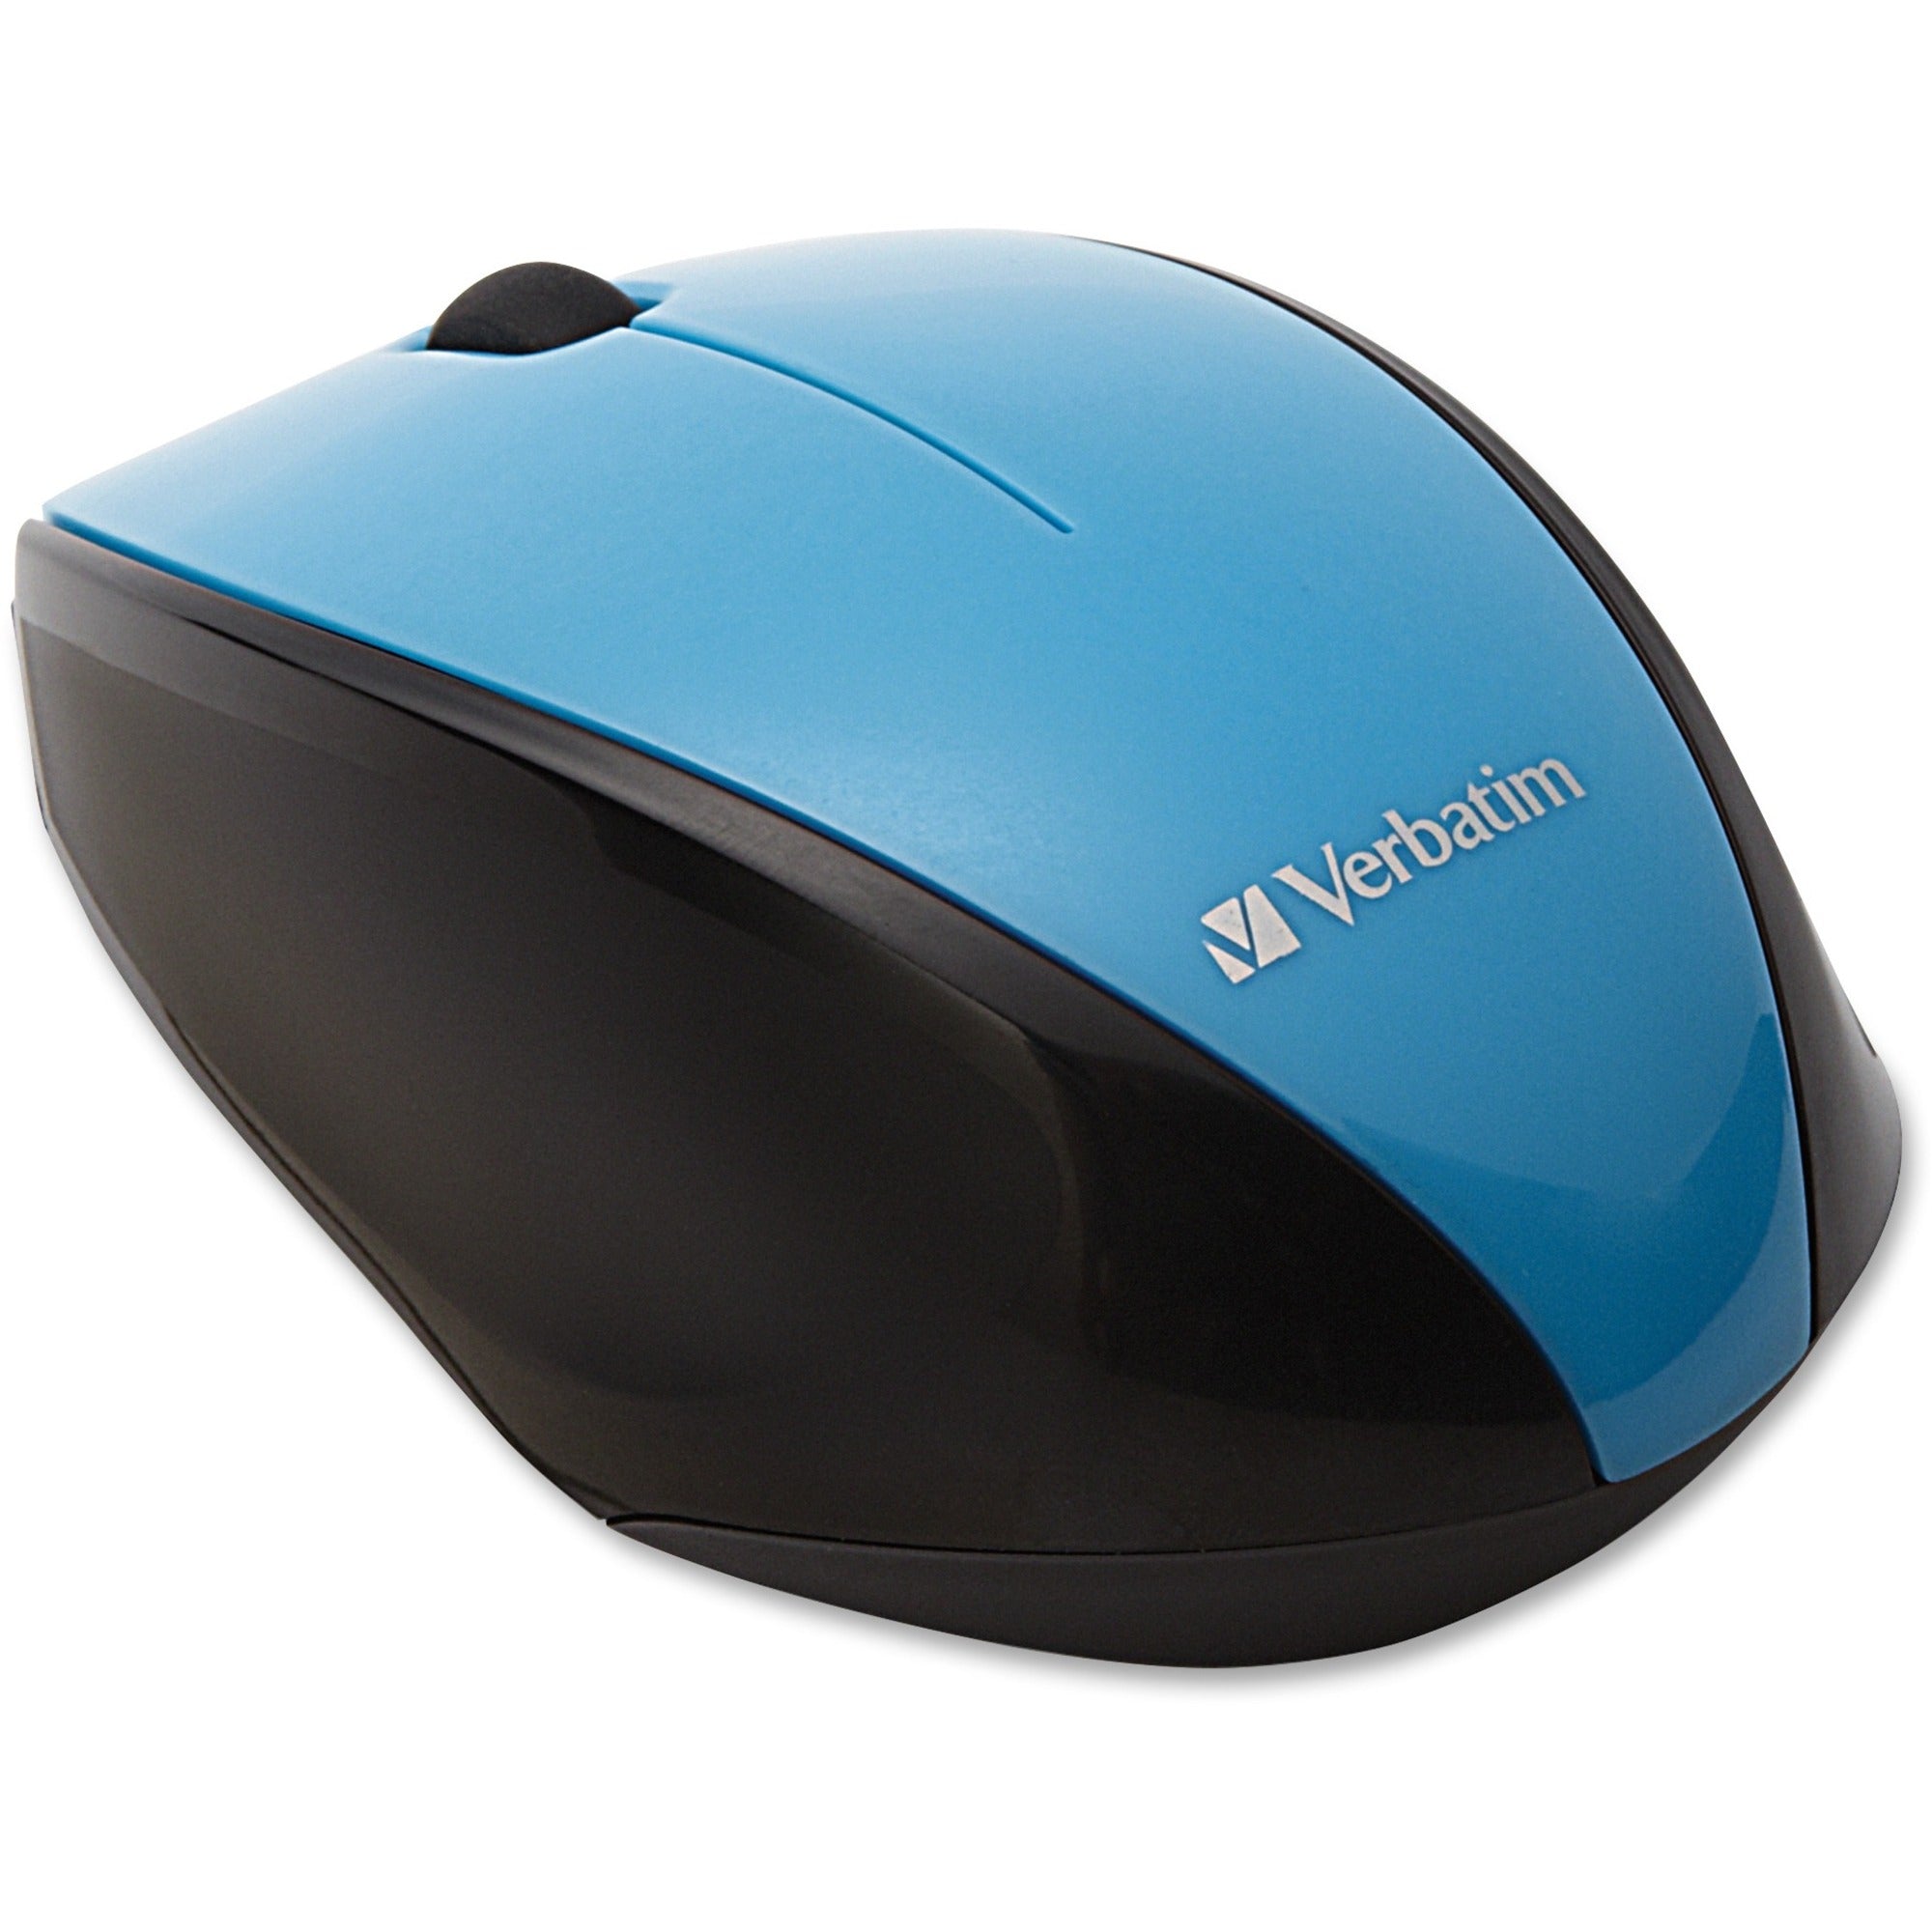 Verbatim Wireless Notebook Multi-Trac Blue LED Mouse - Blue - Blue Optical - Wireless - Radio Frequency - Blue - USB 2.0 - Scroll Wheel - 2 Button(s) - 